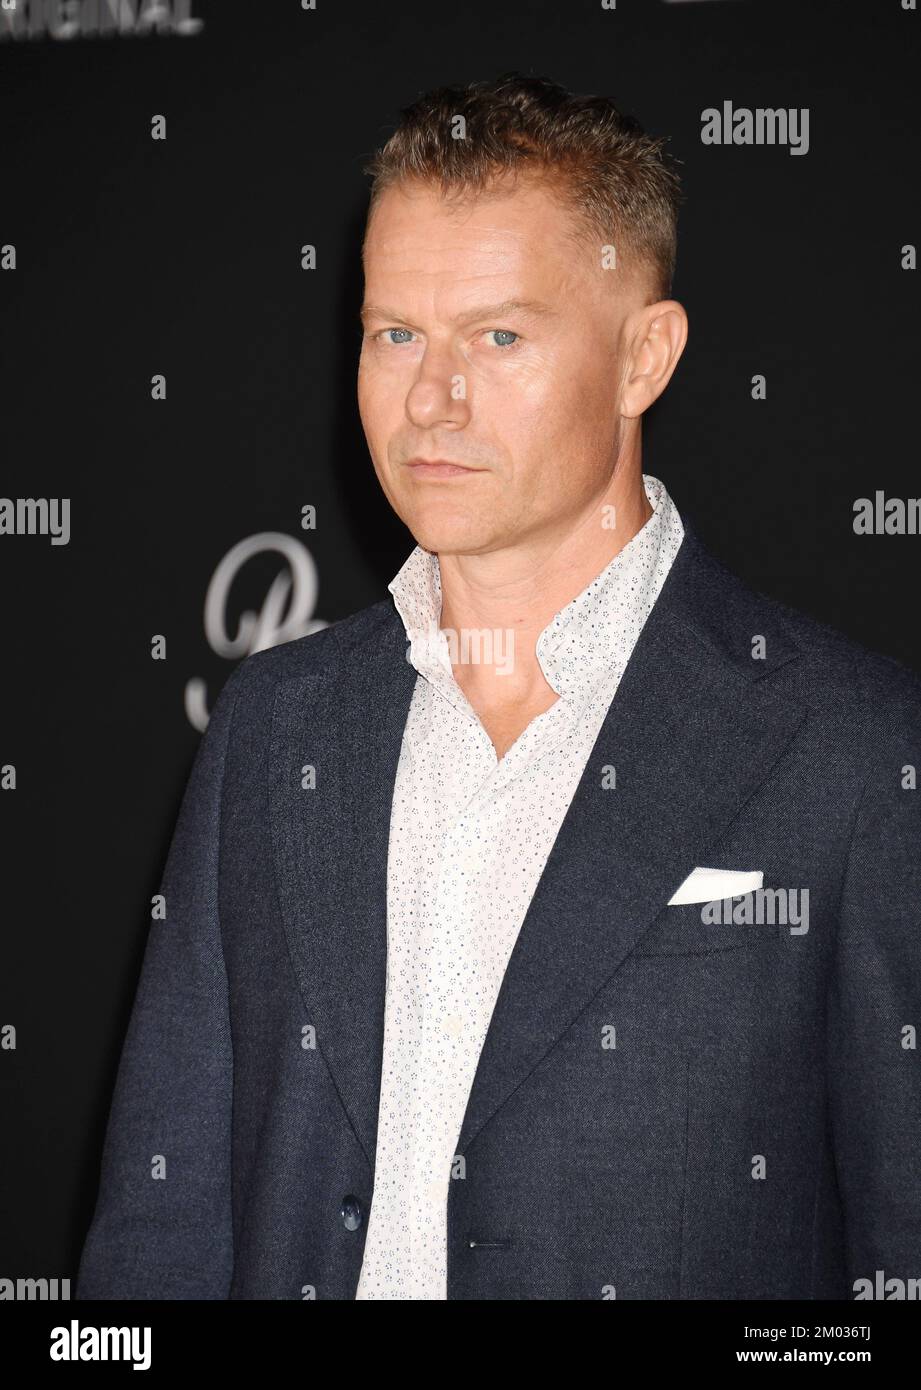 LOS ANGELES, CALIFORNIA - DECEMBER 02: James Badge Dale attends the Los Angeles Premiere Of Paramount+'s '1923' at Hollywood American Legion on Decemb Stock Photo